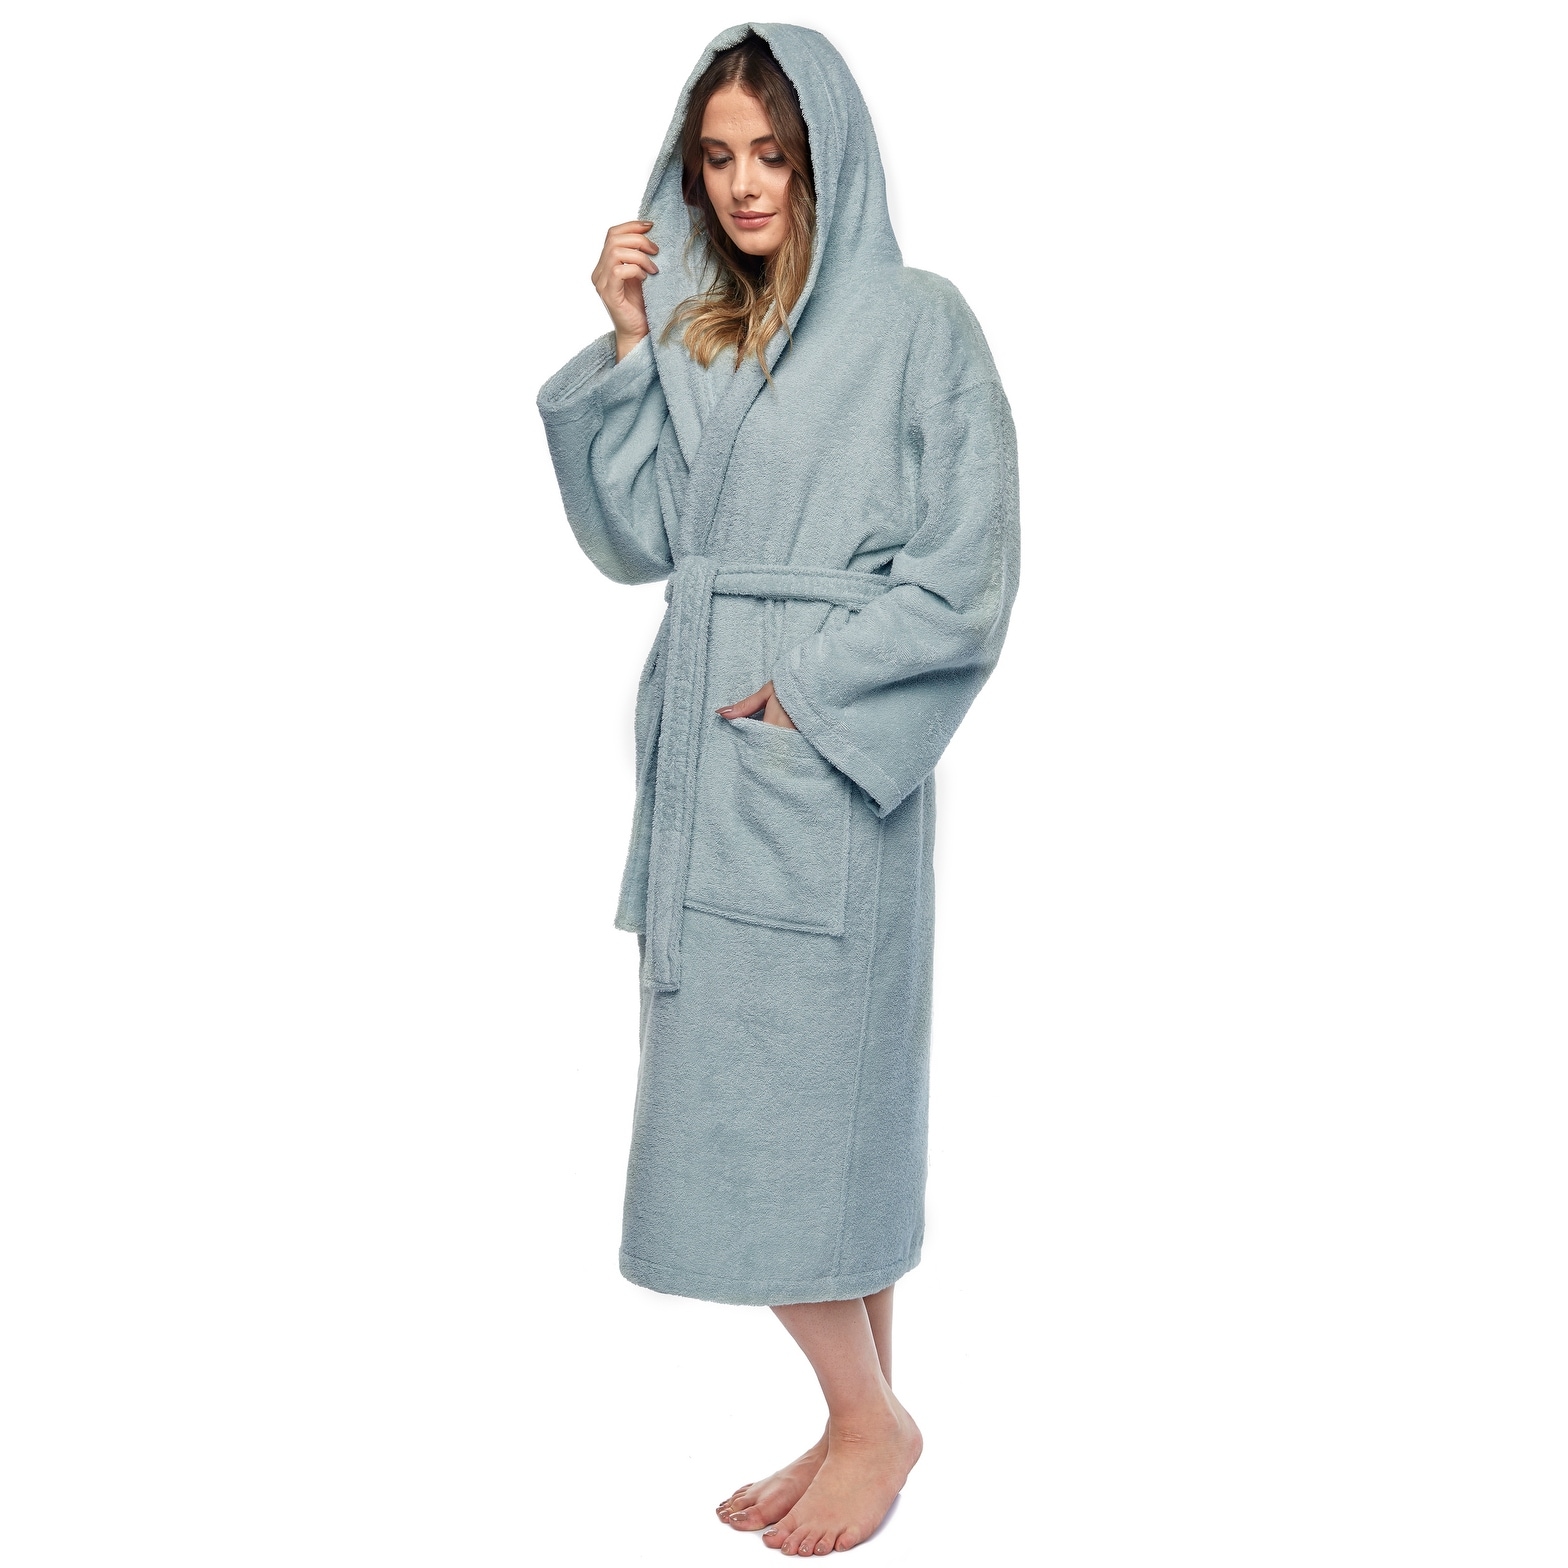 https://ak1.ostkcdn.com/images/products/is/images/direct/576ba5d2ea93979adef78a353a624afcf872bd38/Women%27s-Turkish-Cotton-Hooded-Bathrobe.jpg